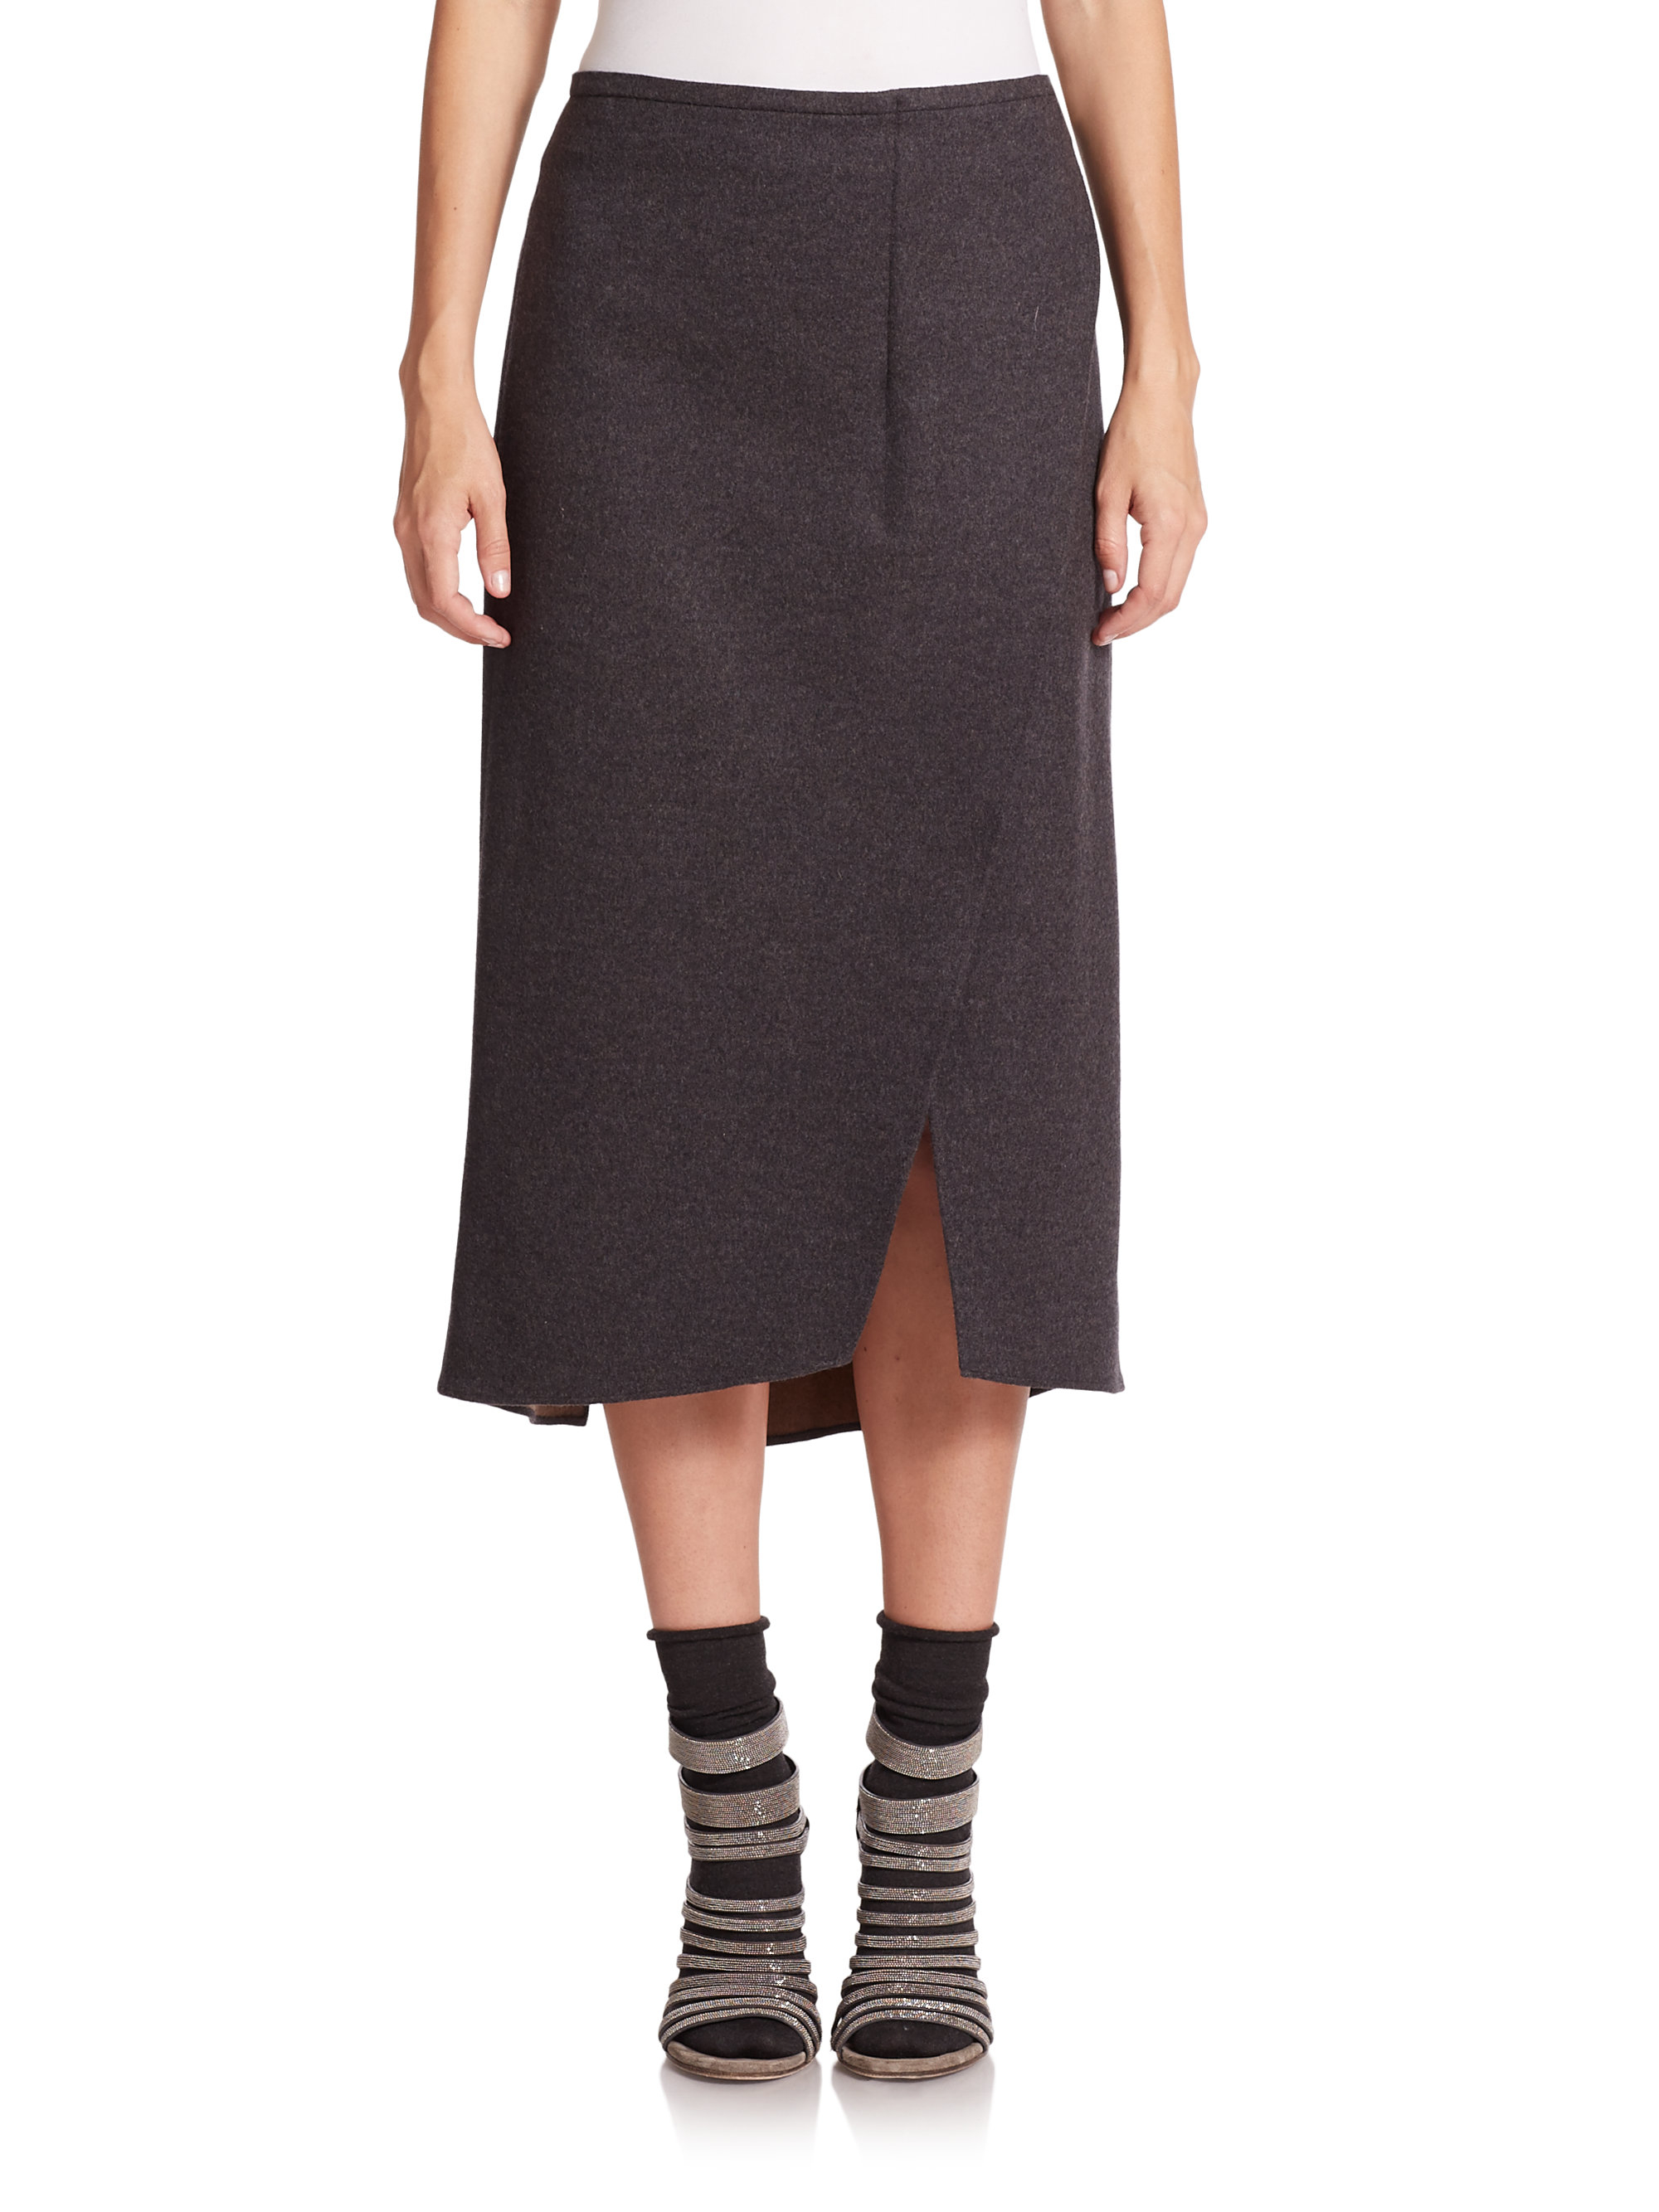 Lyst - Brunello Cucinelli Double-faced Wool/cashmere Slit Pencil Skirt ...